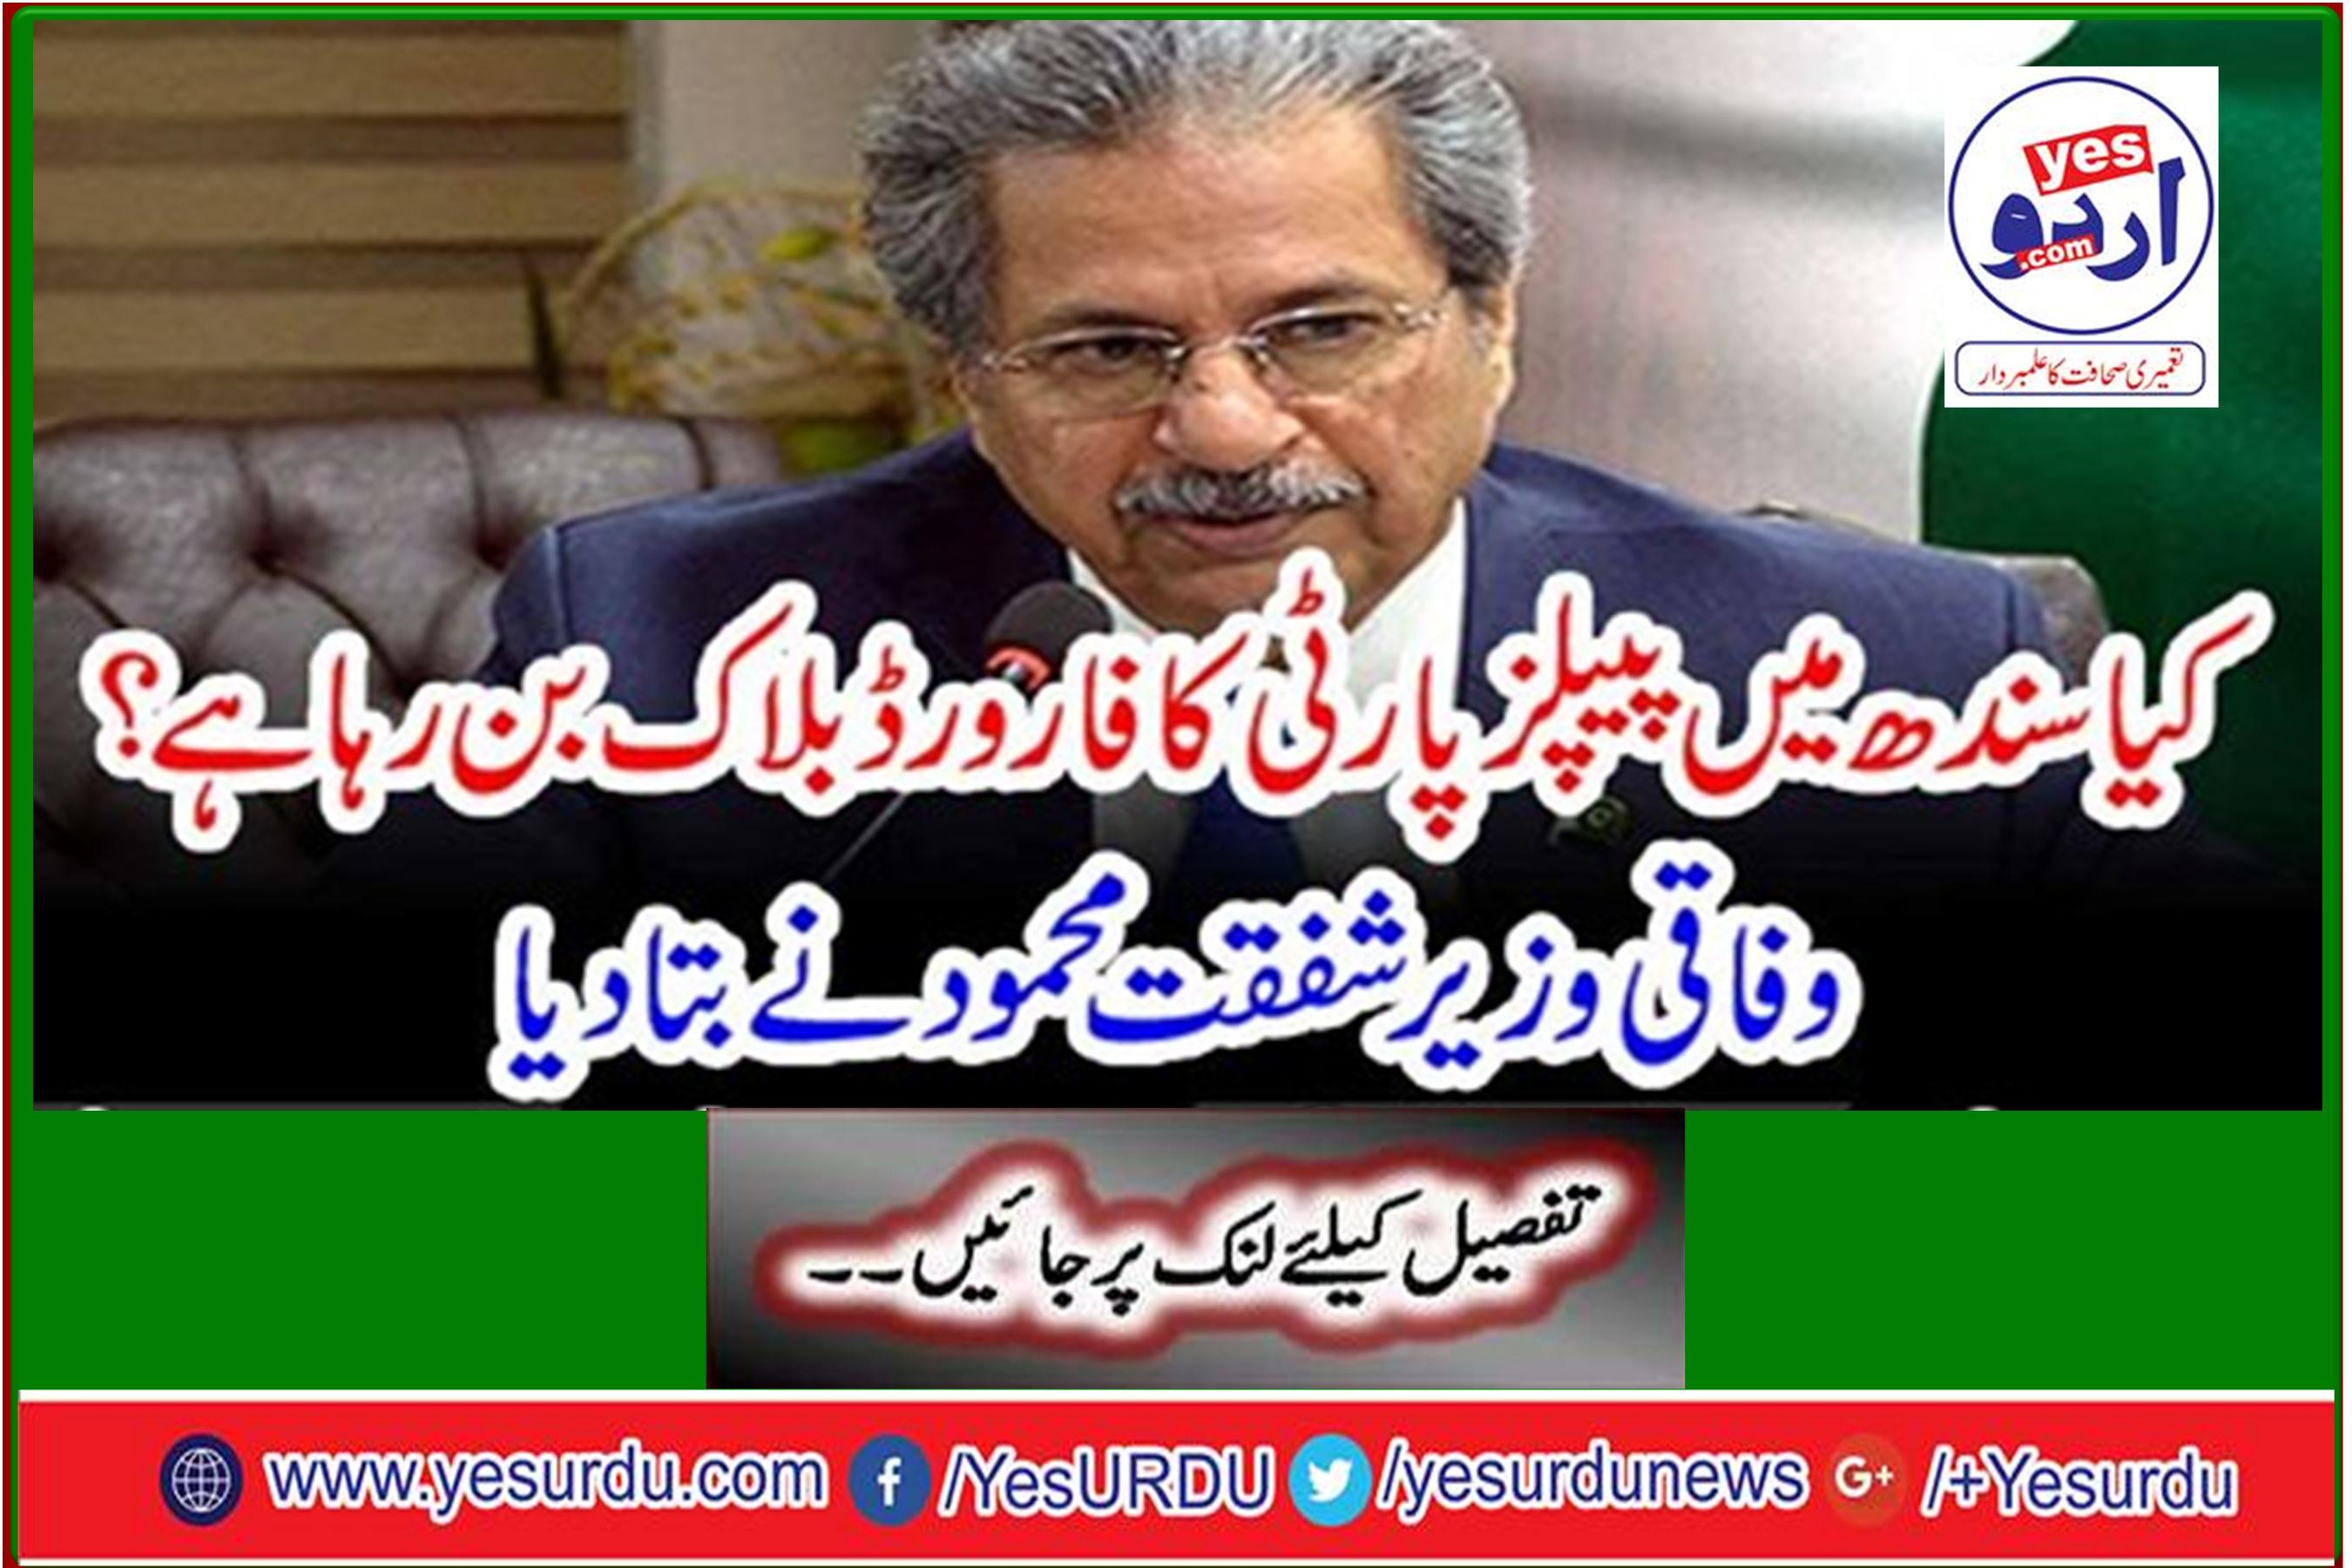 Is the People's Party Forward Blocking in Sindh? Federal Minister Shafqat Mahmood said